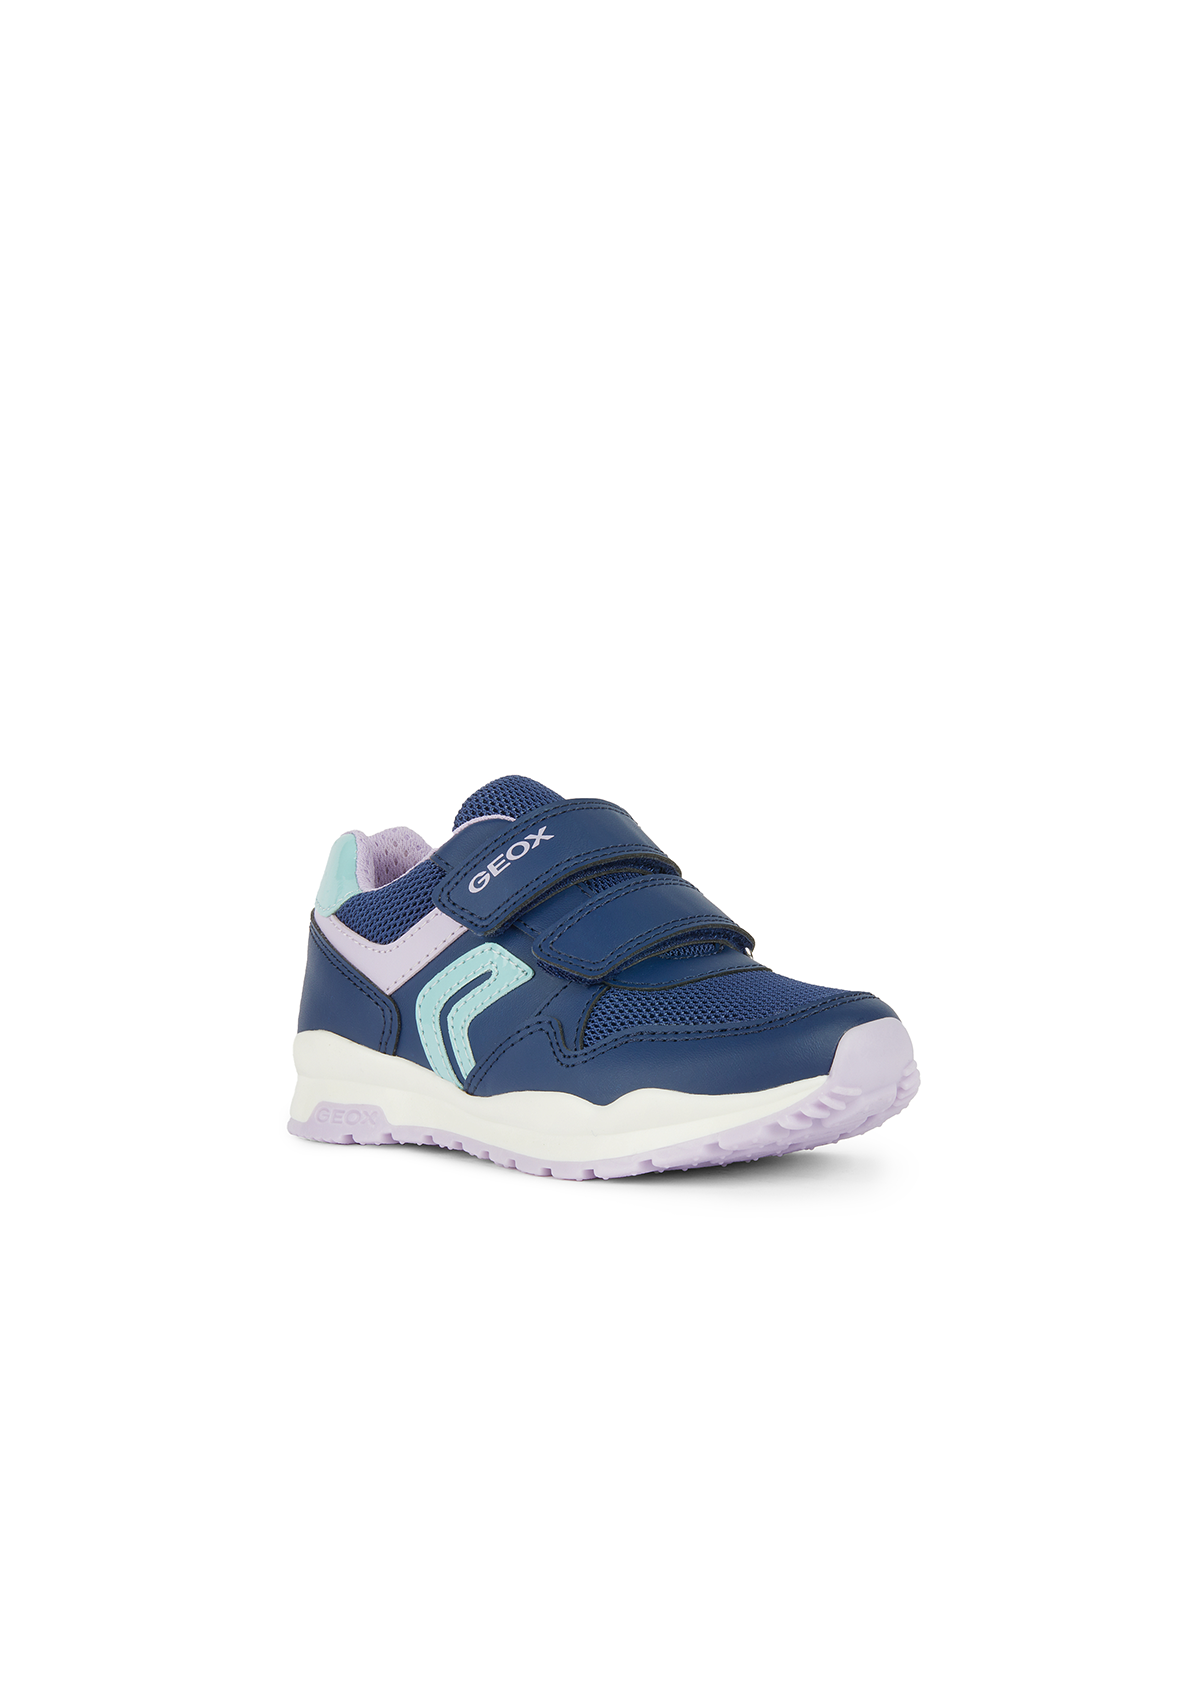 Geox Girls Trainer PAVEL Navy Lilac